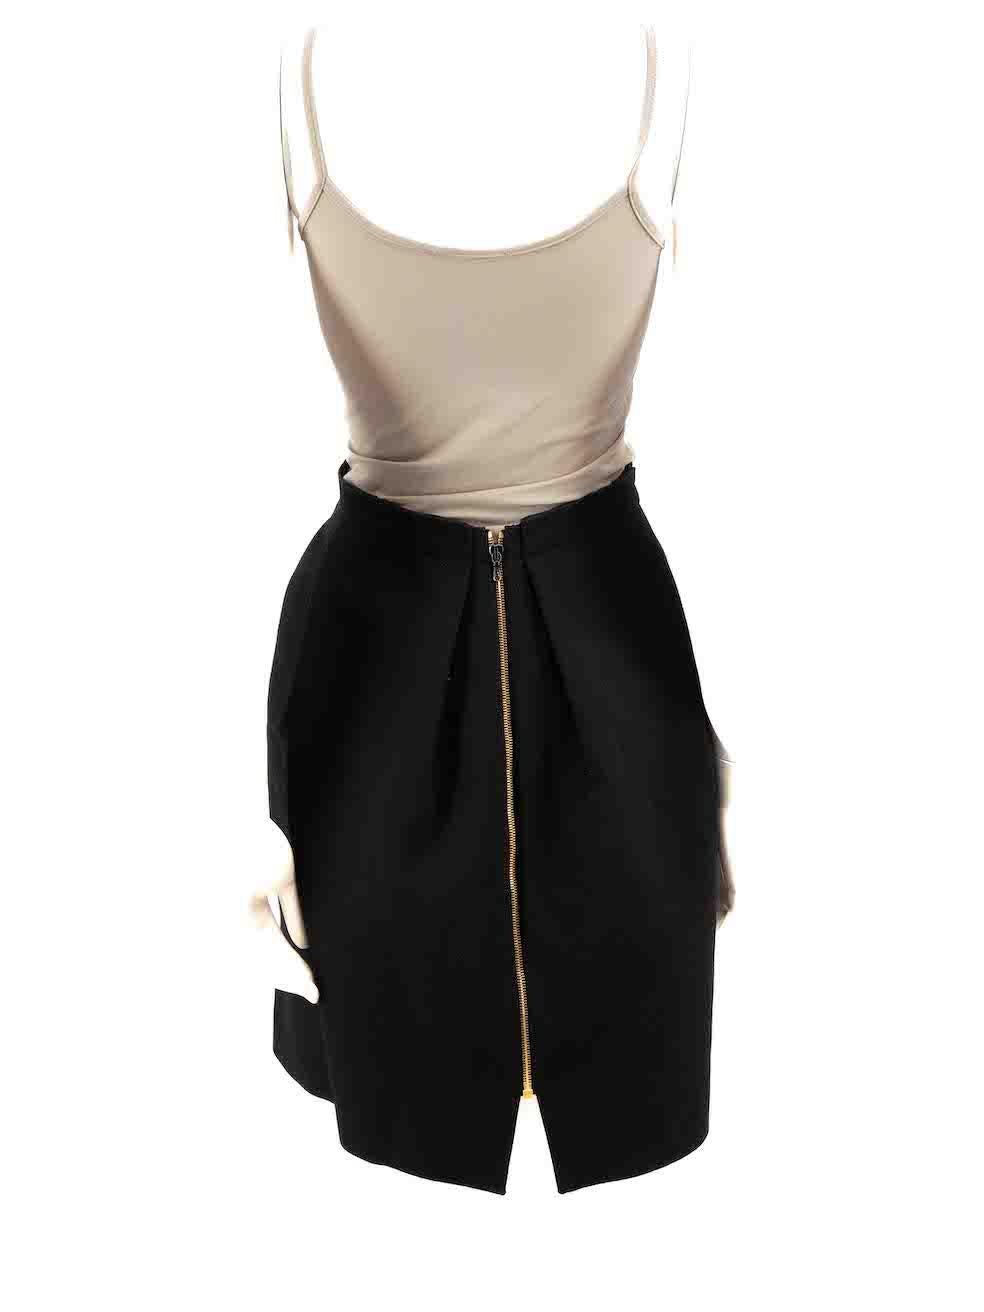 Roland Mouret Black Wool Gathered Zipped Skirt Size 4XL In Good Condition For Sale In London, GB